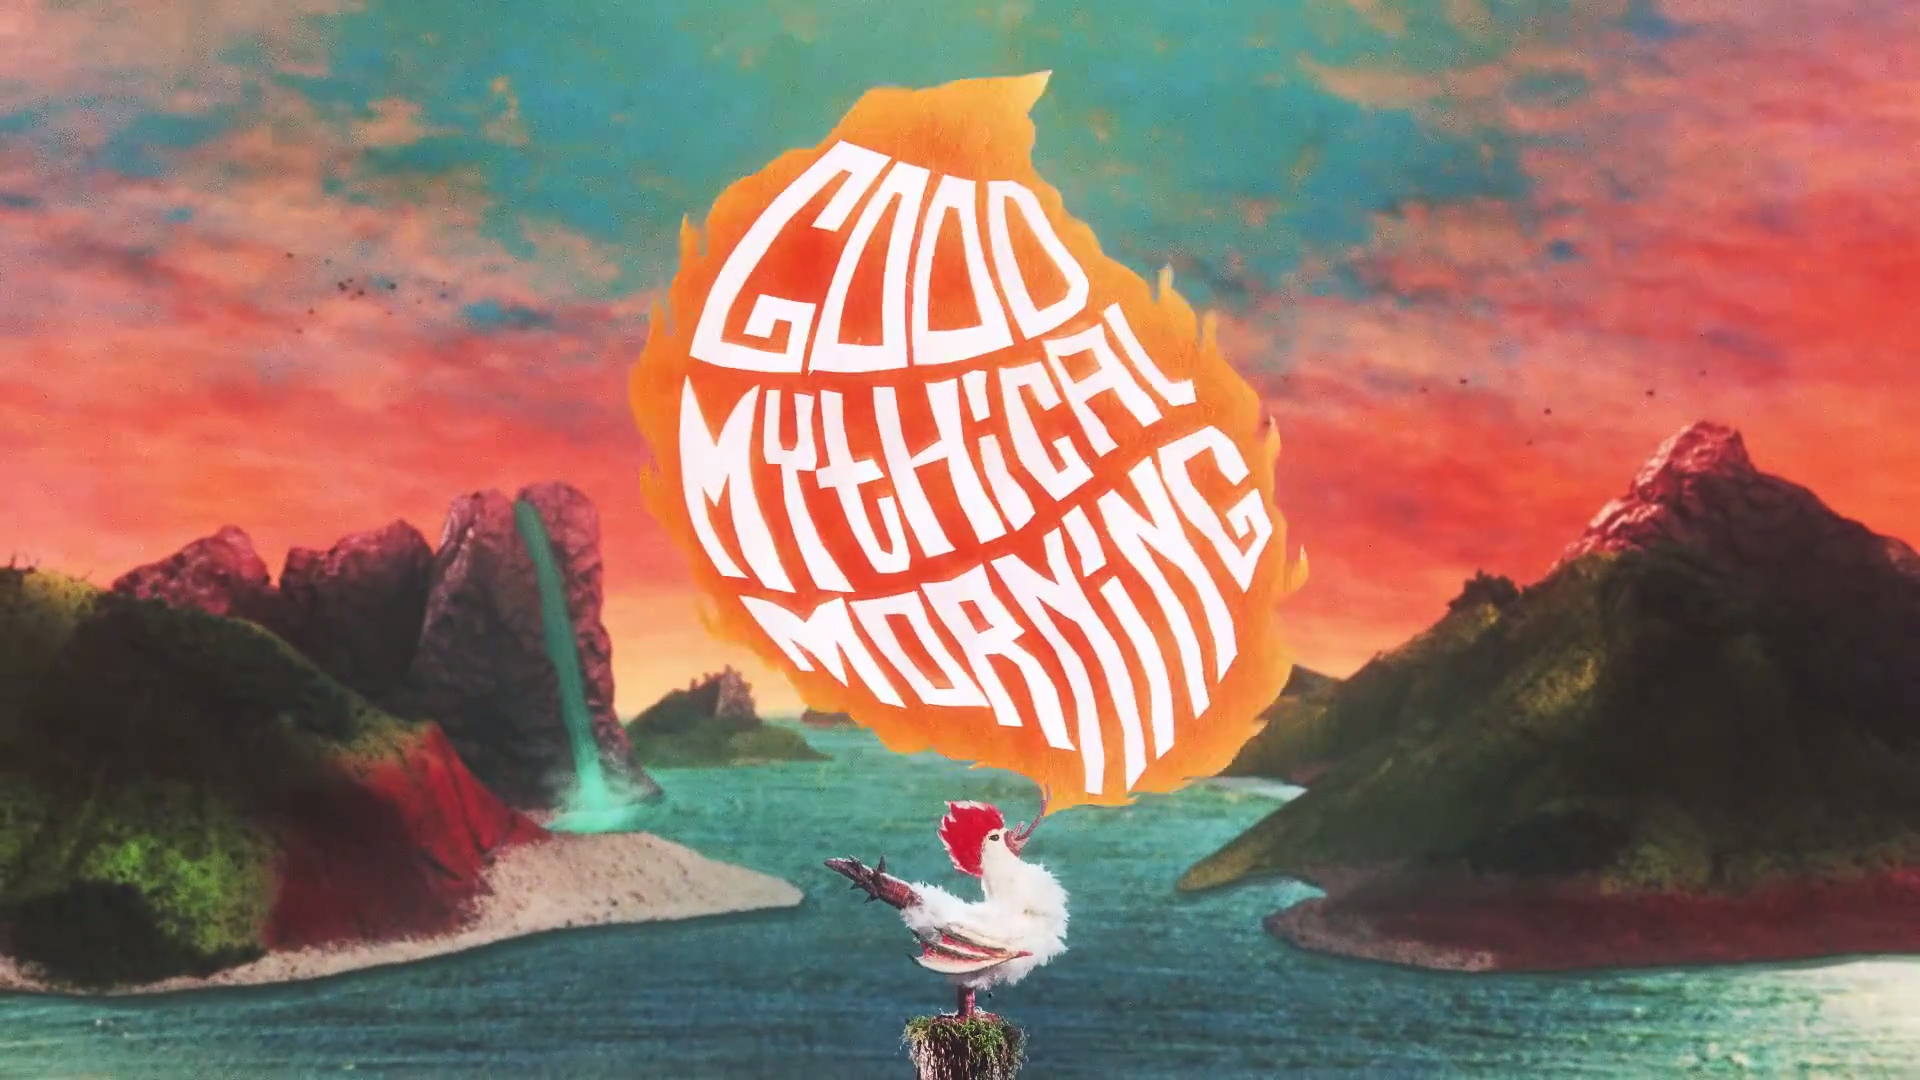 Good Mythical Morning HD Wallpapers and Backgrounds.